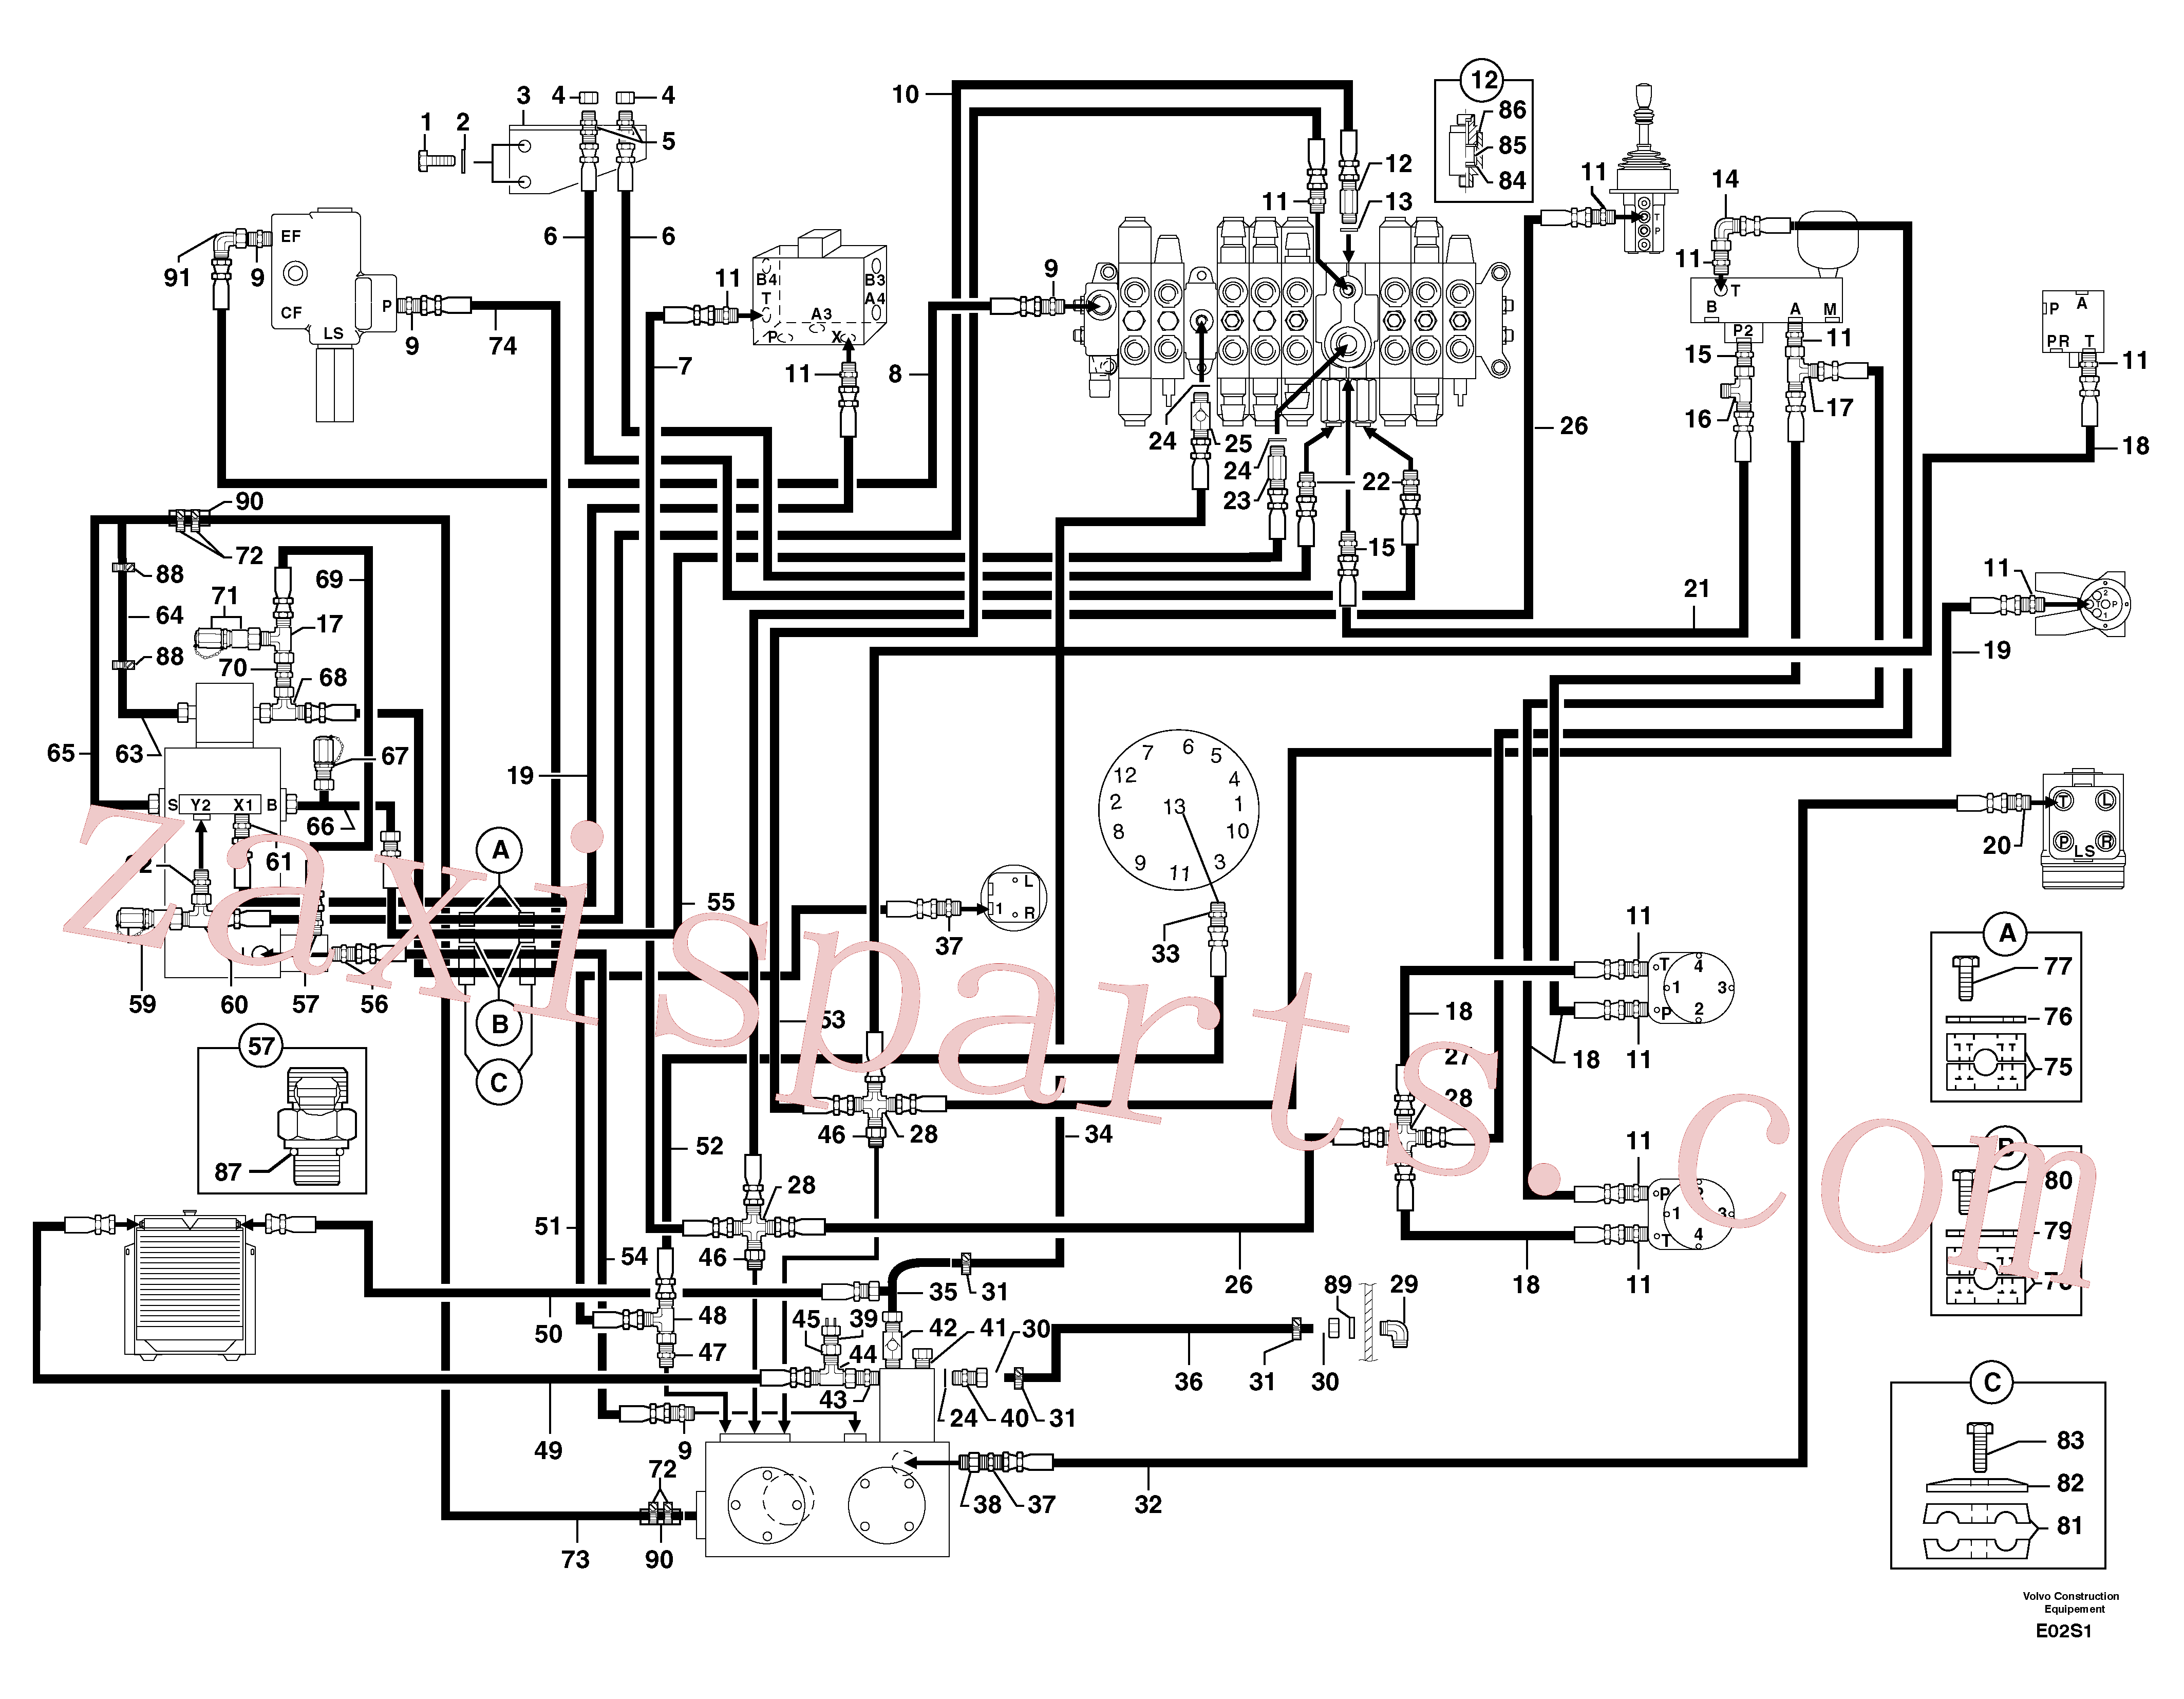 PJ4192456 for Volvo Attachments supply and return circuit(E02S1 assembly)